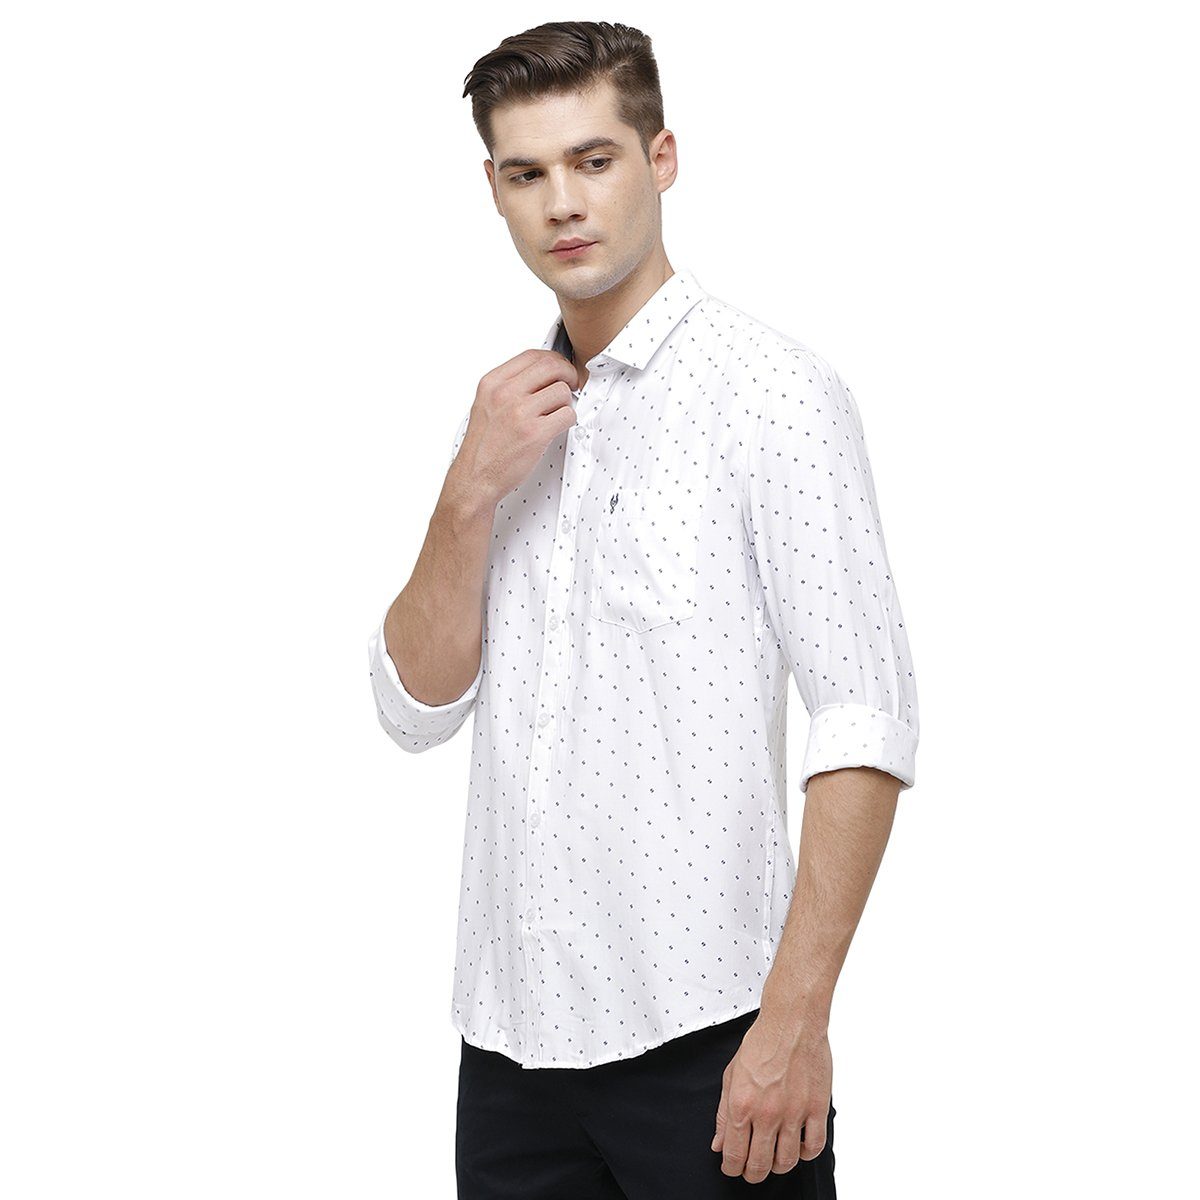 Classic Polo Mens Collar Neck Full Sleeve White Smart Fit 100% Cotton Woven Shirt SM1-79 A-FS-PRT-SF Shirts Classic Polo 